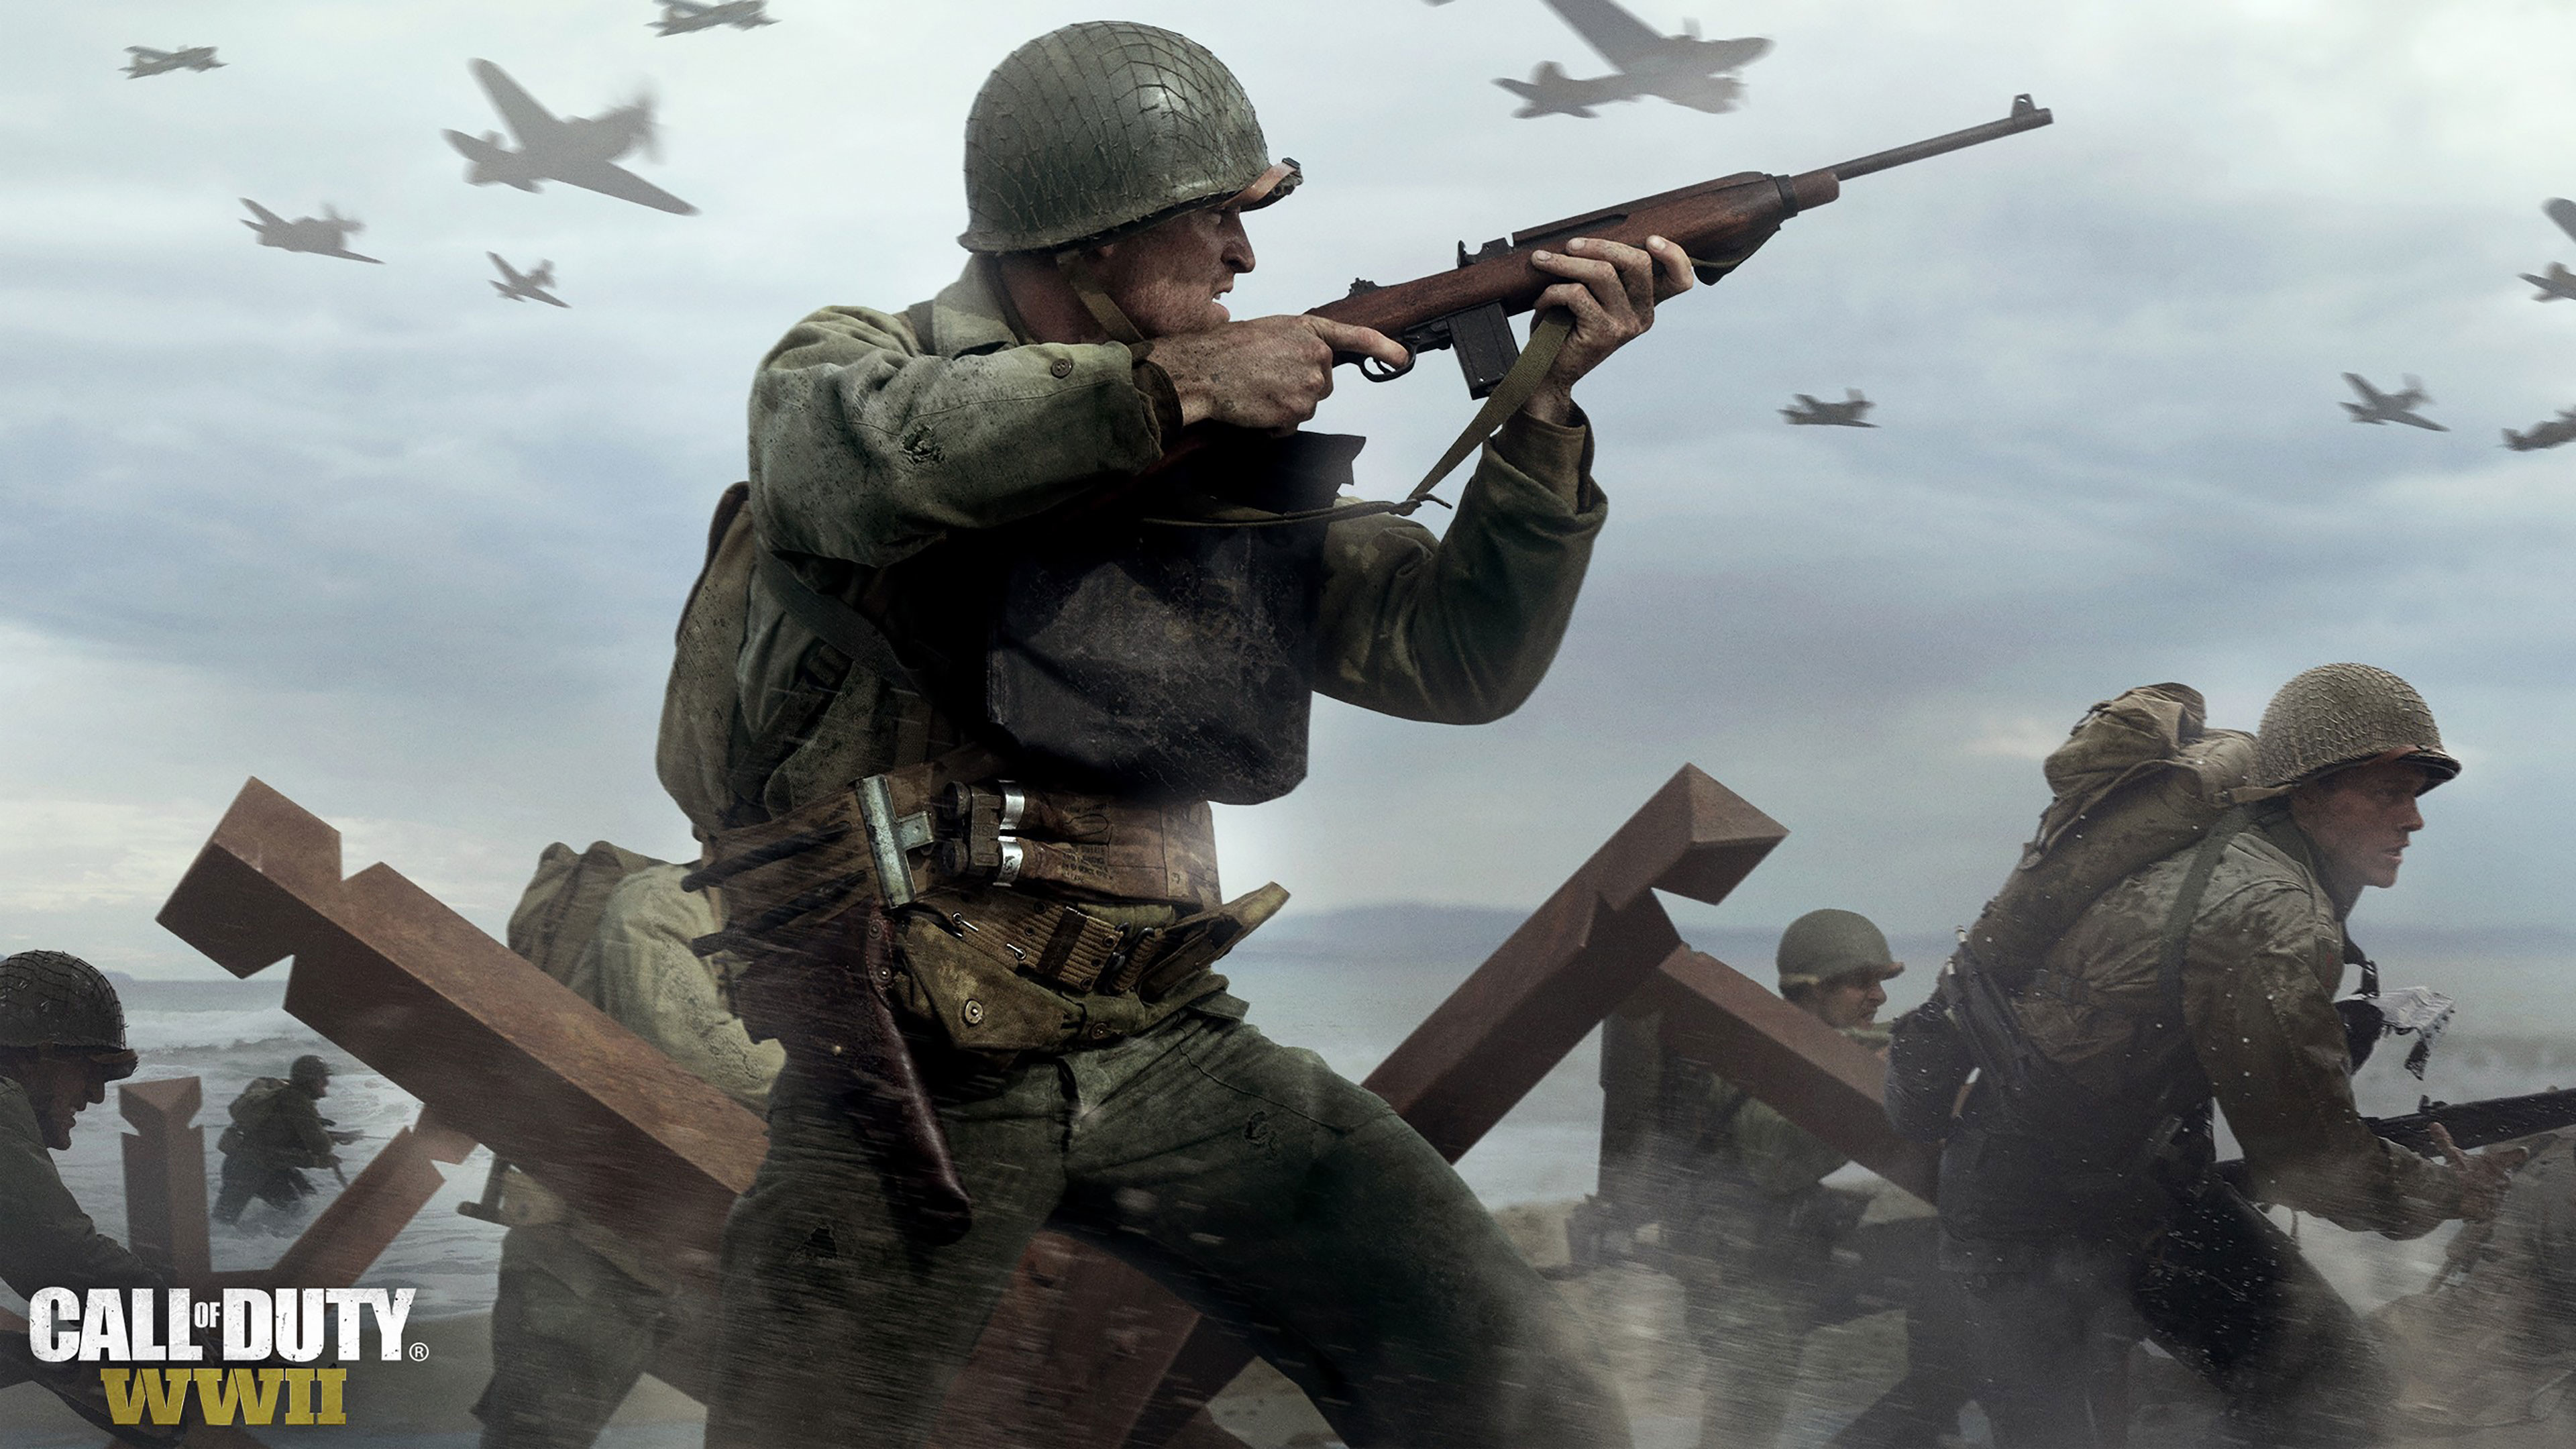 Awesome Call of Duty: WWII Soldiers in War wallpaper